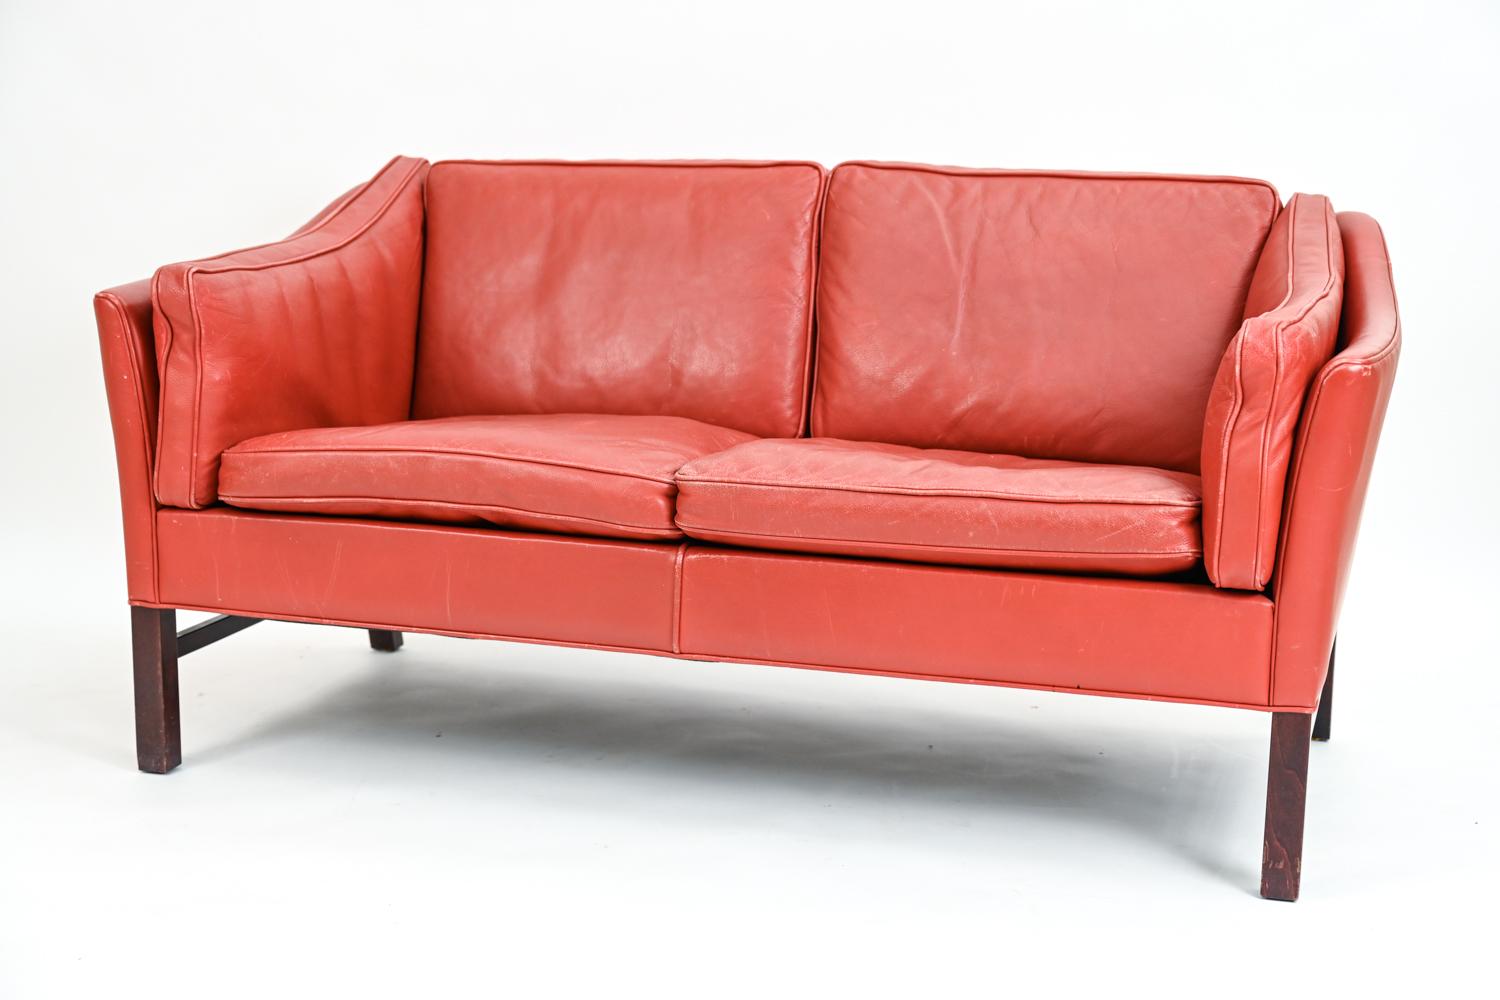 Danish Modern Leather Sofa Suite by Grant Mobelfabrik, c. 1970's For Sale 5